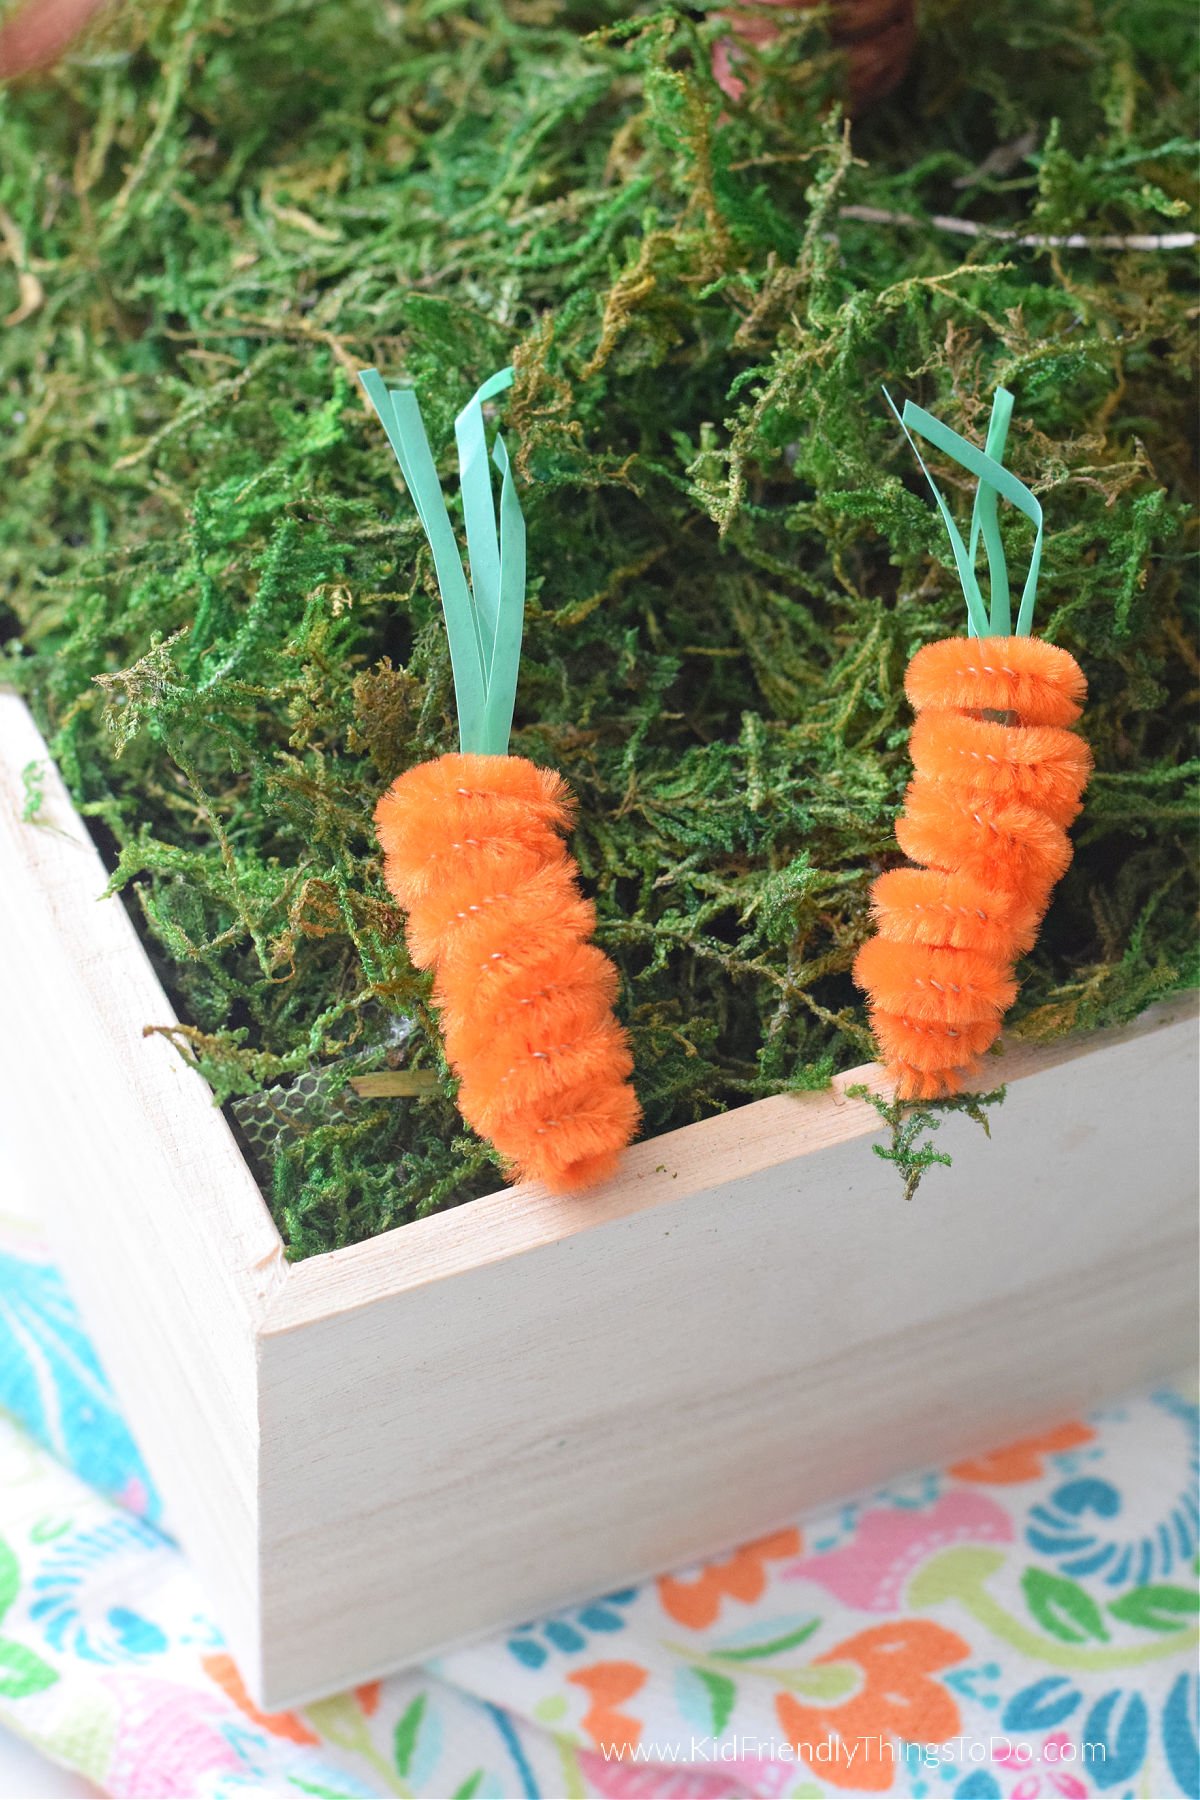 pipe cleaner carrots 